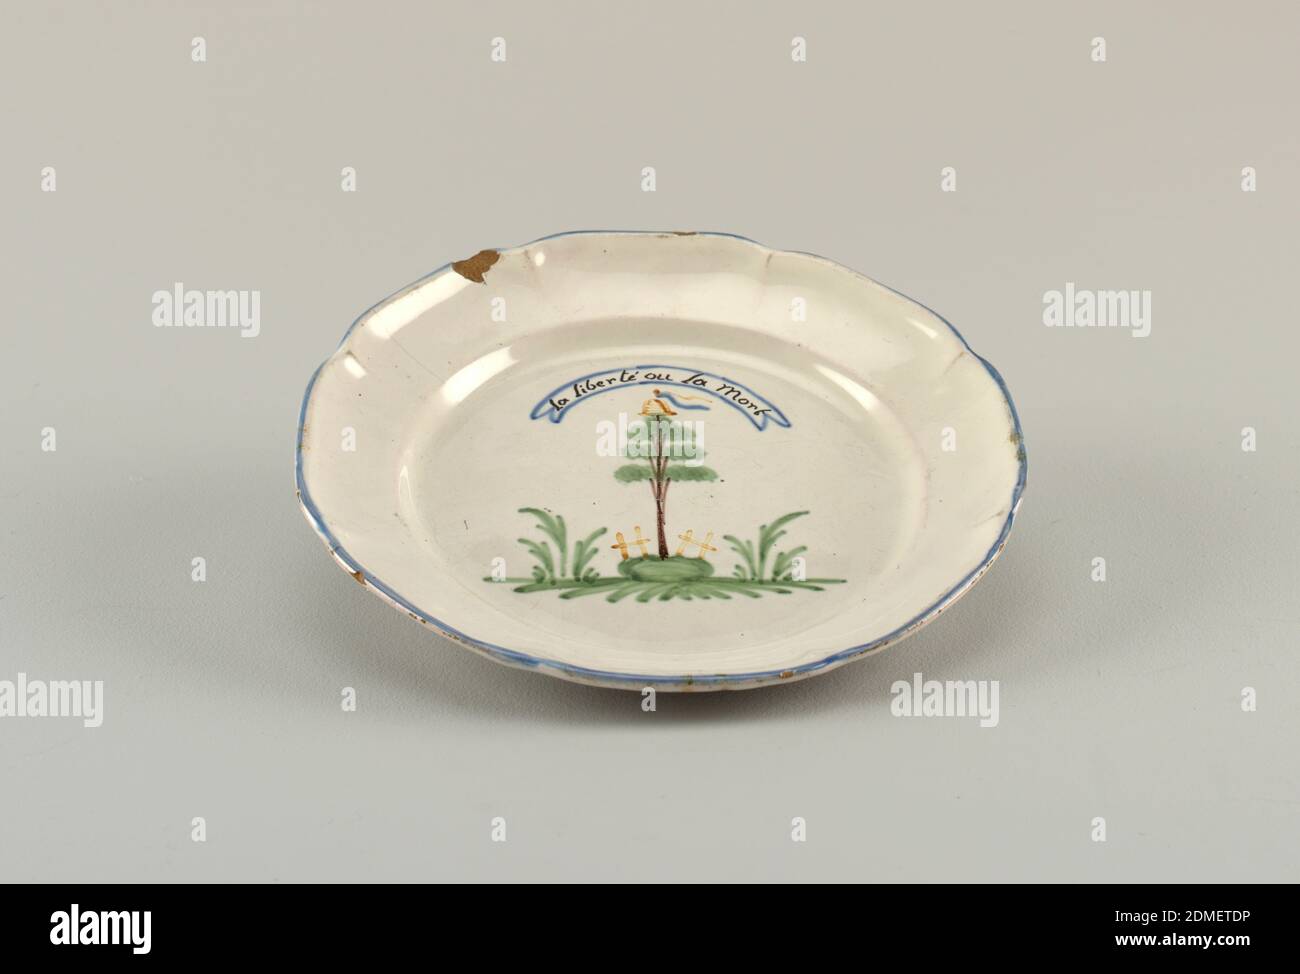 Plate, Tin-glazed earthenware, Steep curved marly, eight-sided scalloped edge with blue band. In center, a tree crowned by cap and banner, surrounded by band, inscribed: La Liberté ou la Morte., France, 19th century, ceramics, Decorative Arts, Plate Stock Photo